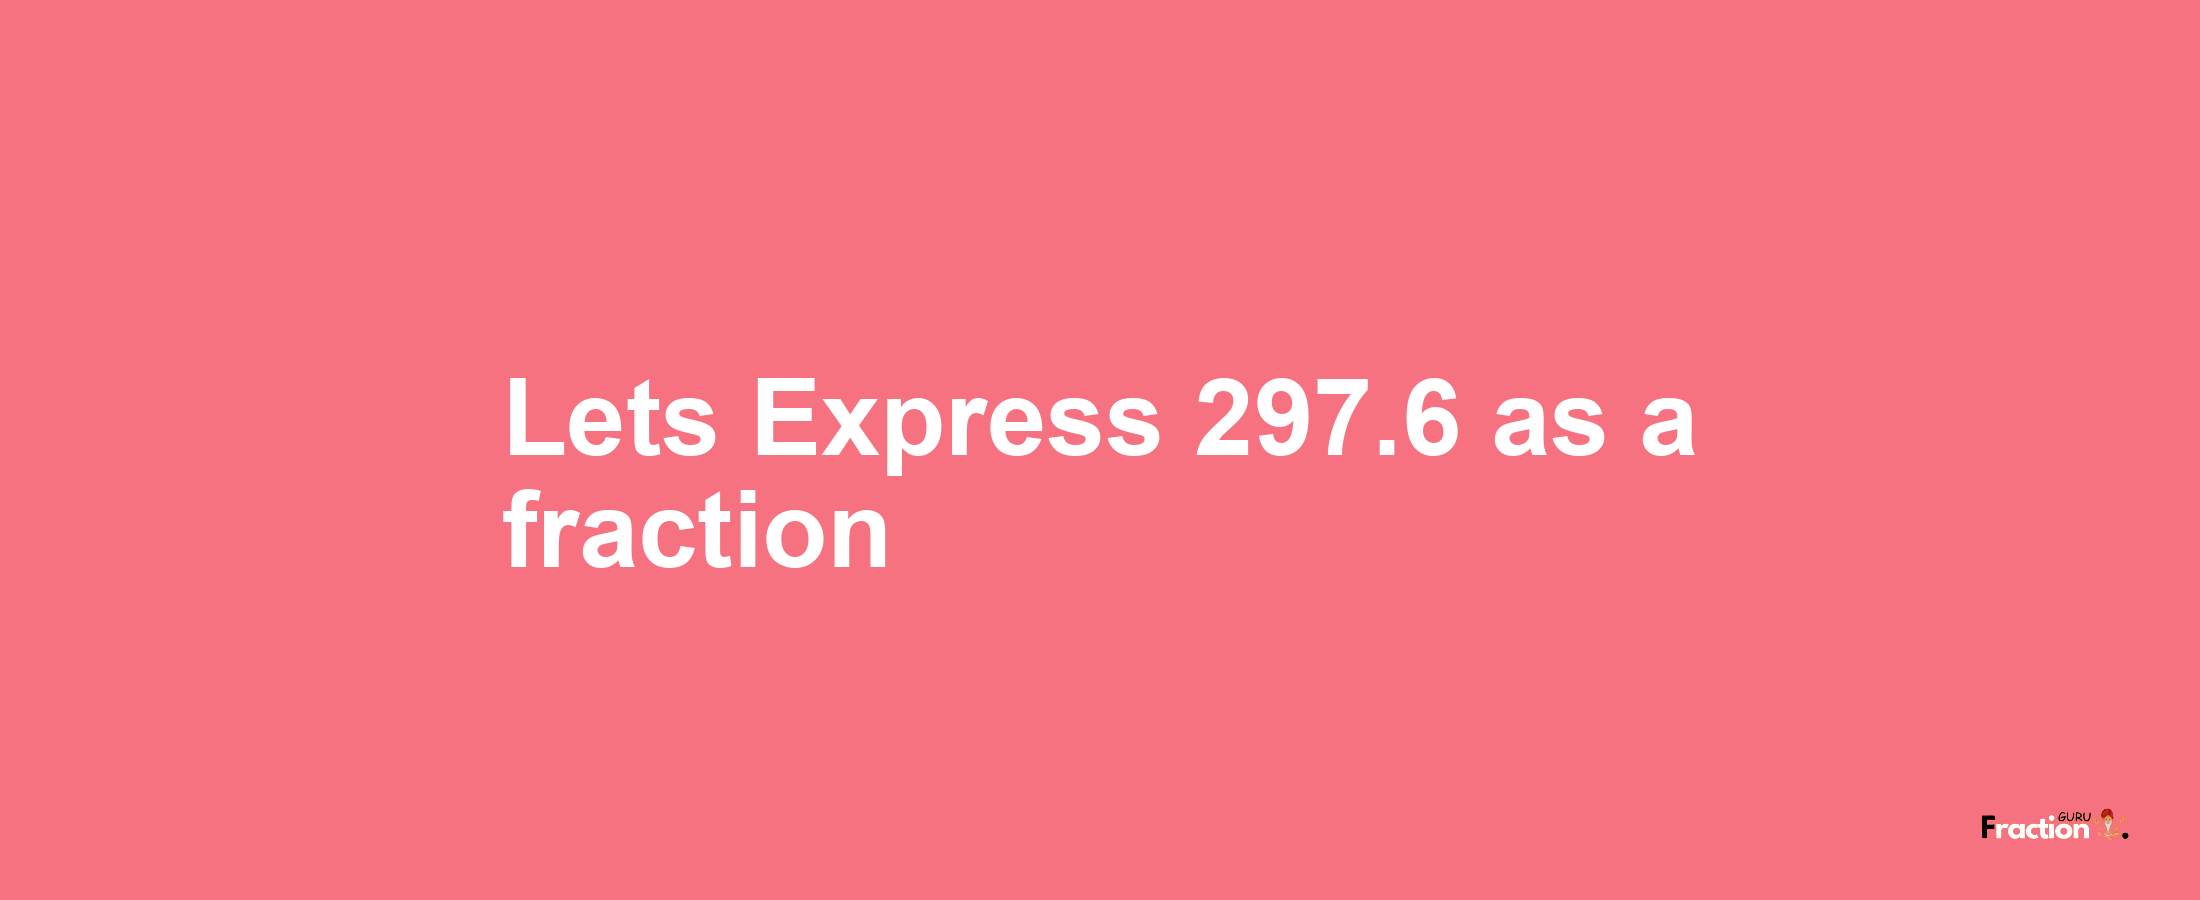 Lets Express 297.6 as afraction